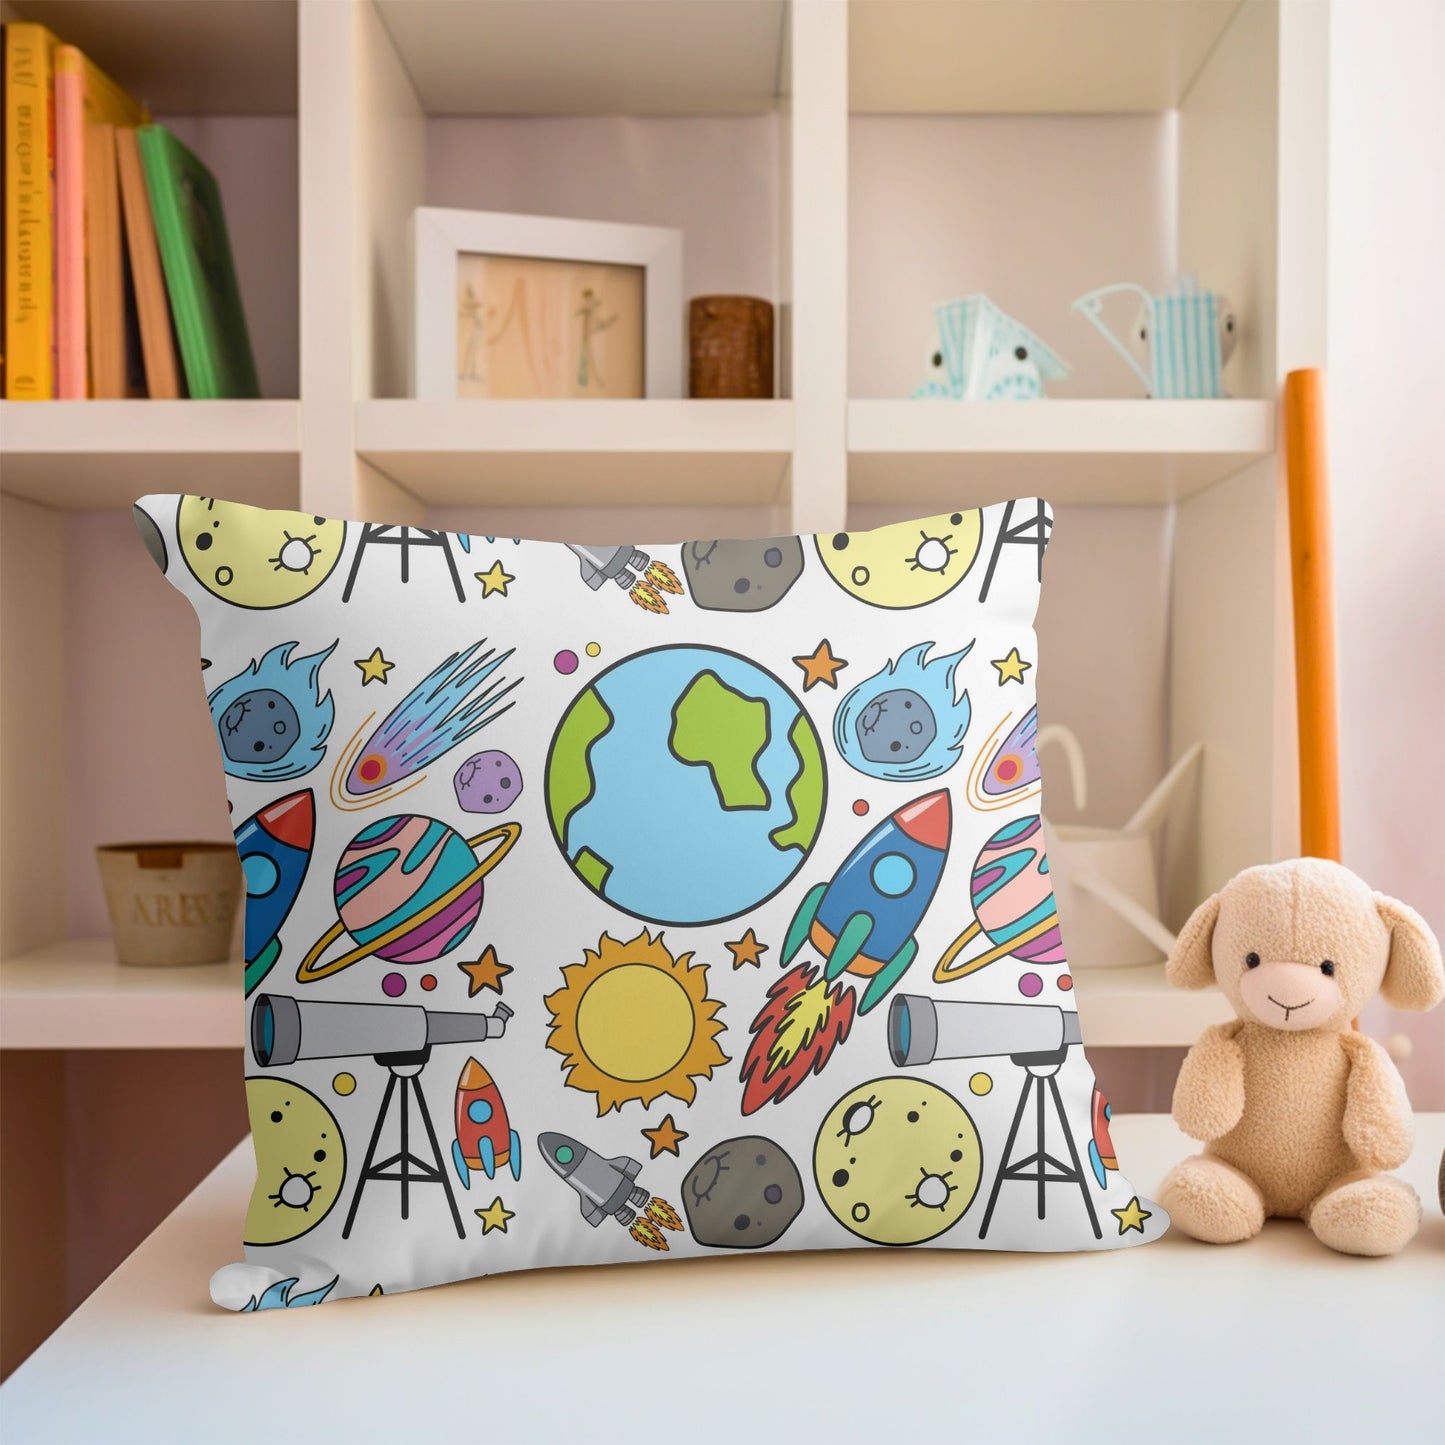 Baby room pillow featuring a skyrockets pattern for celestial dreams.